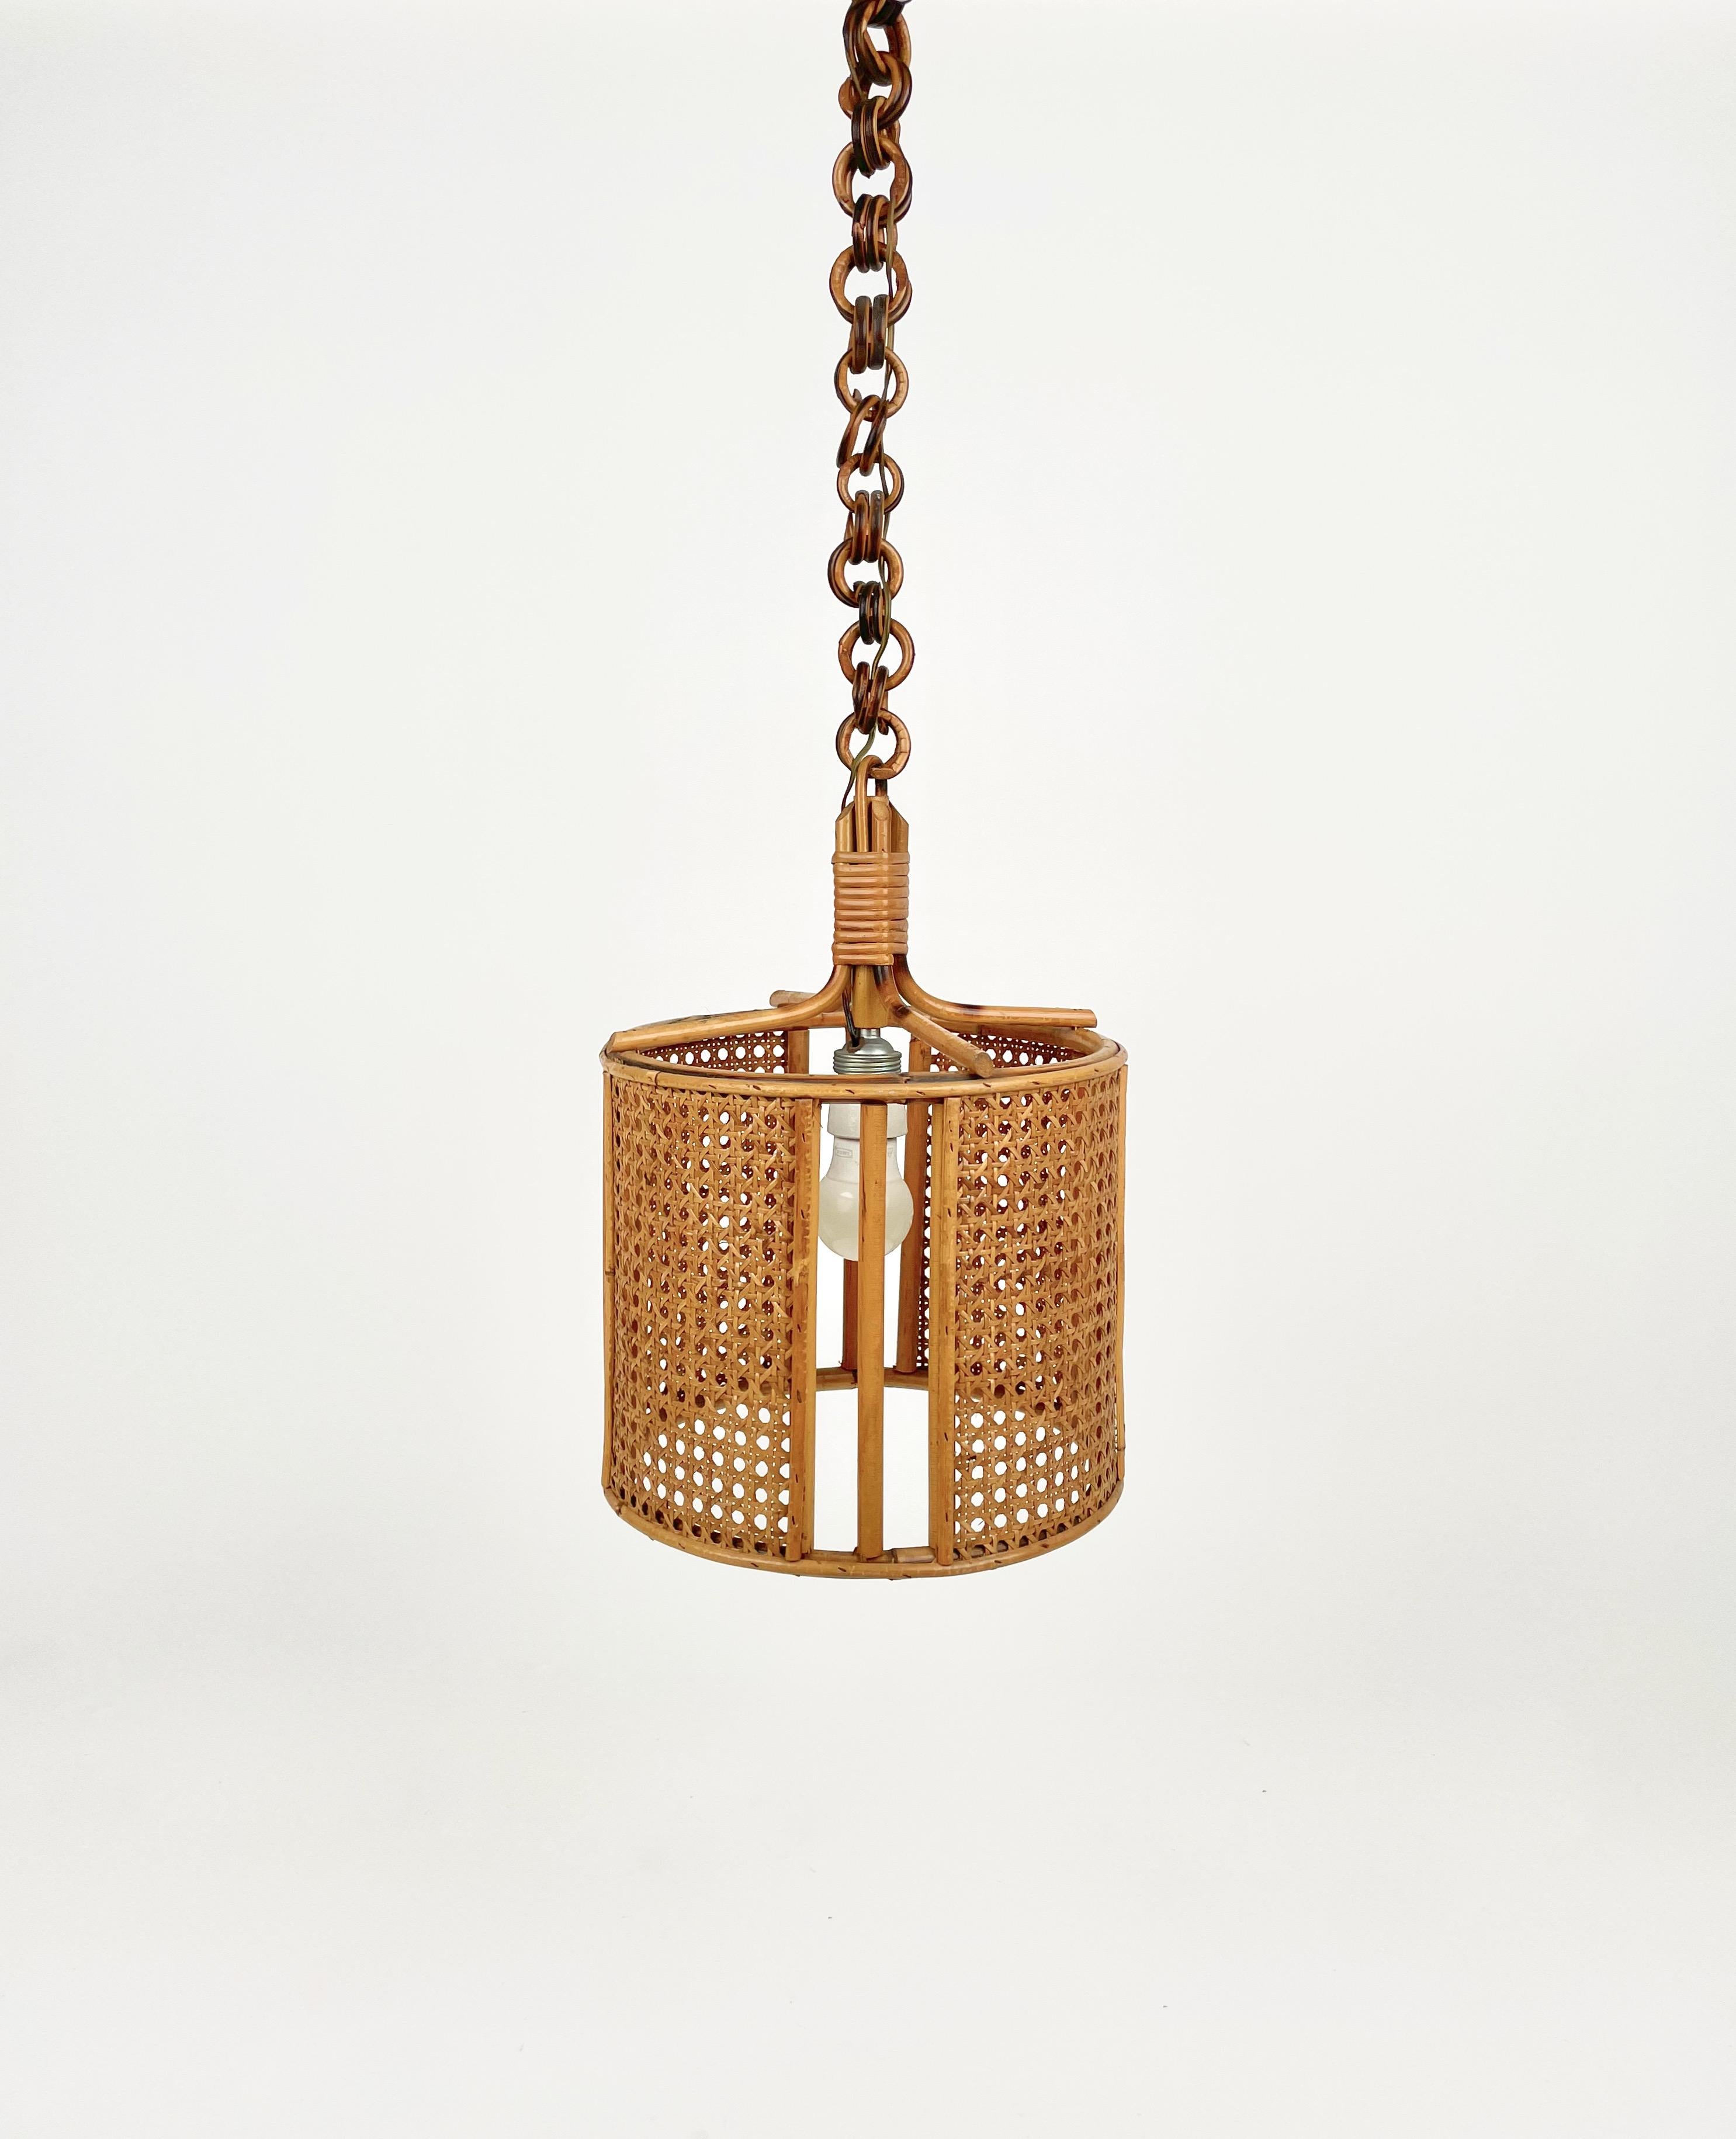 Italian Midcentury French Riviera Rattan and Wicker Pendent, Italy 1960s For Sale